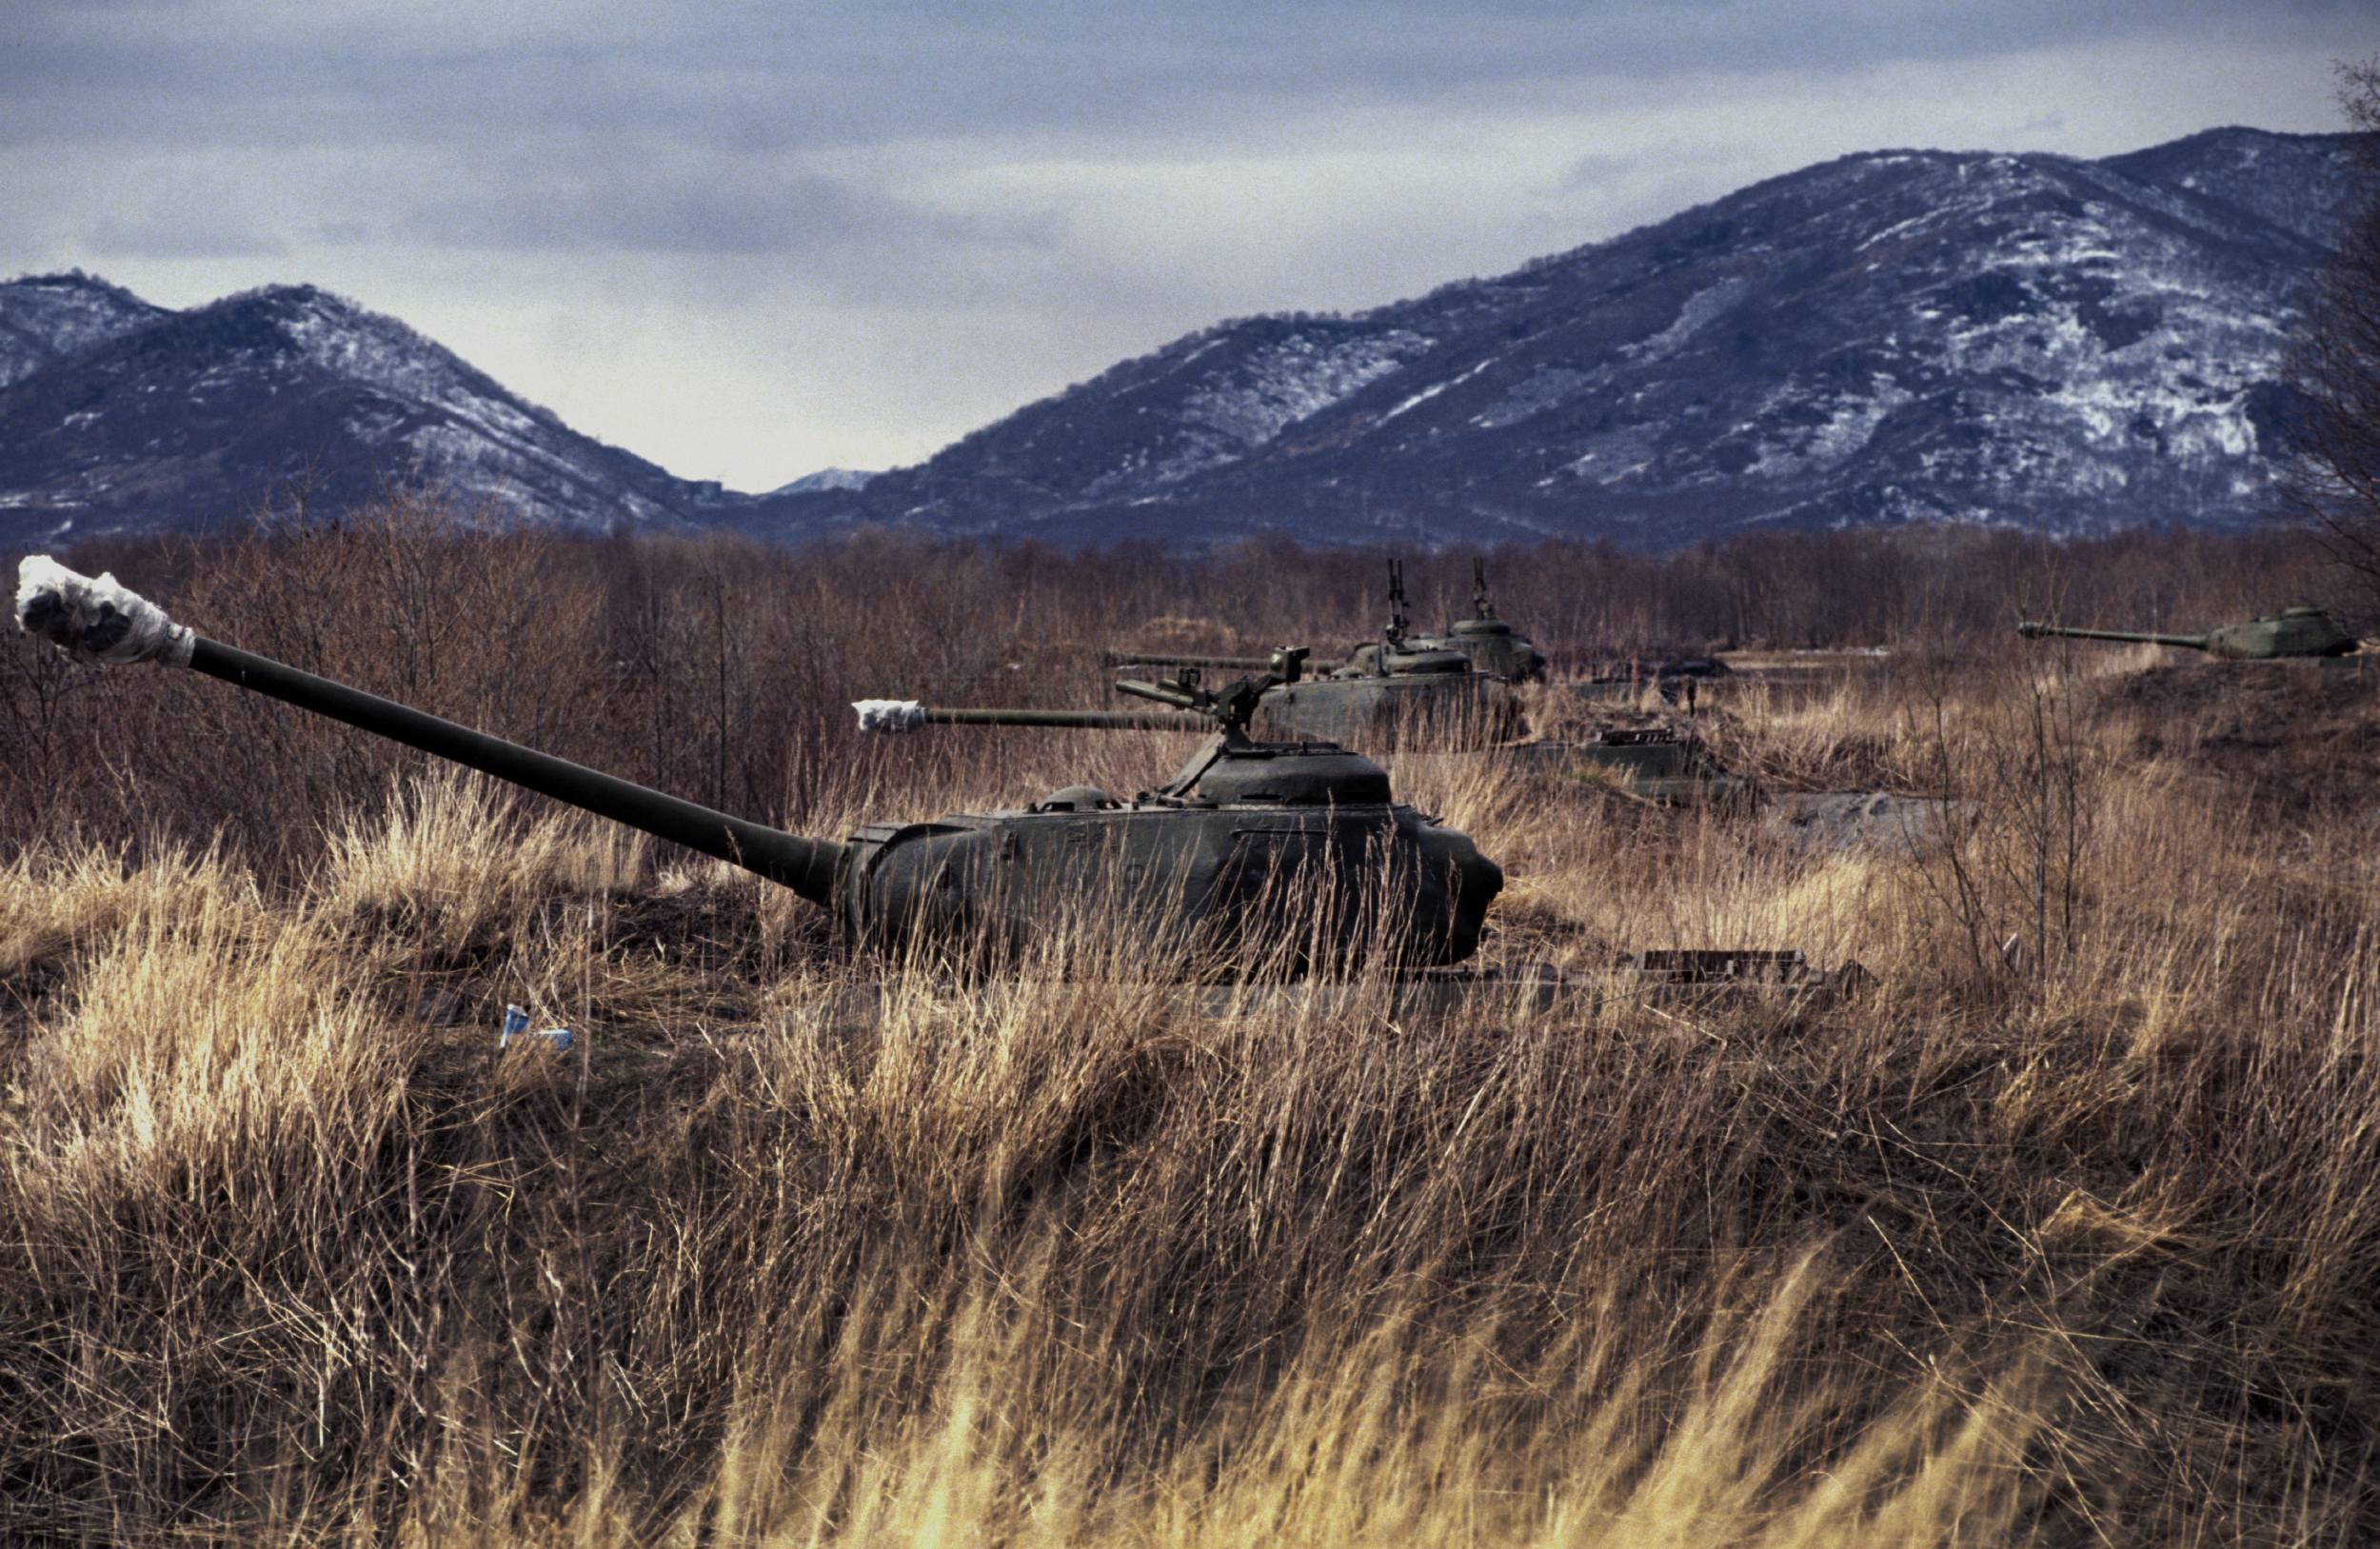  Decommissioned tanks on the Kamchatka peninsula, Russia. 1991 